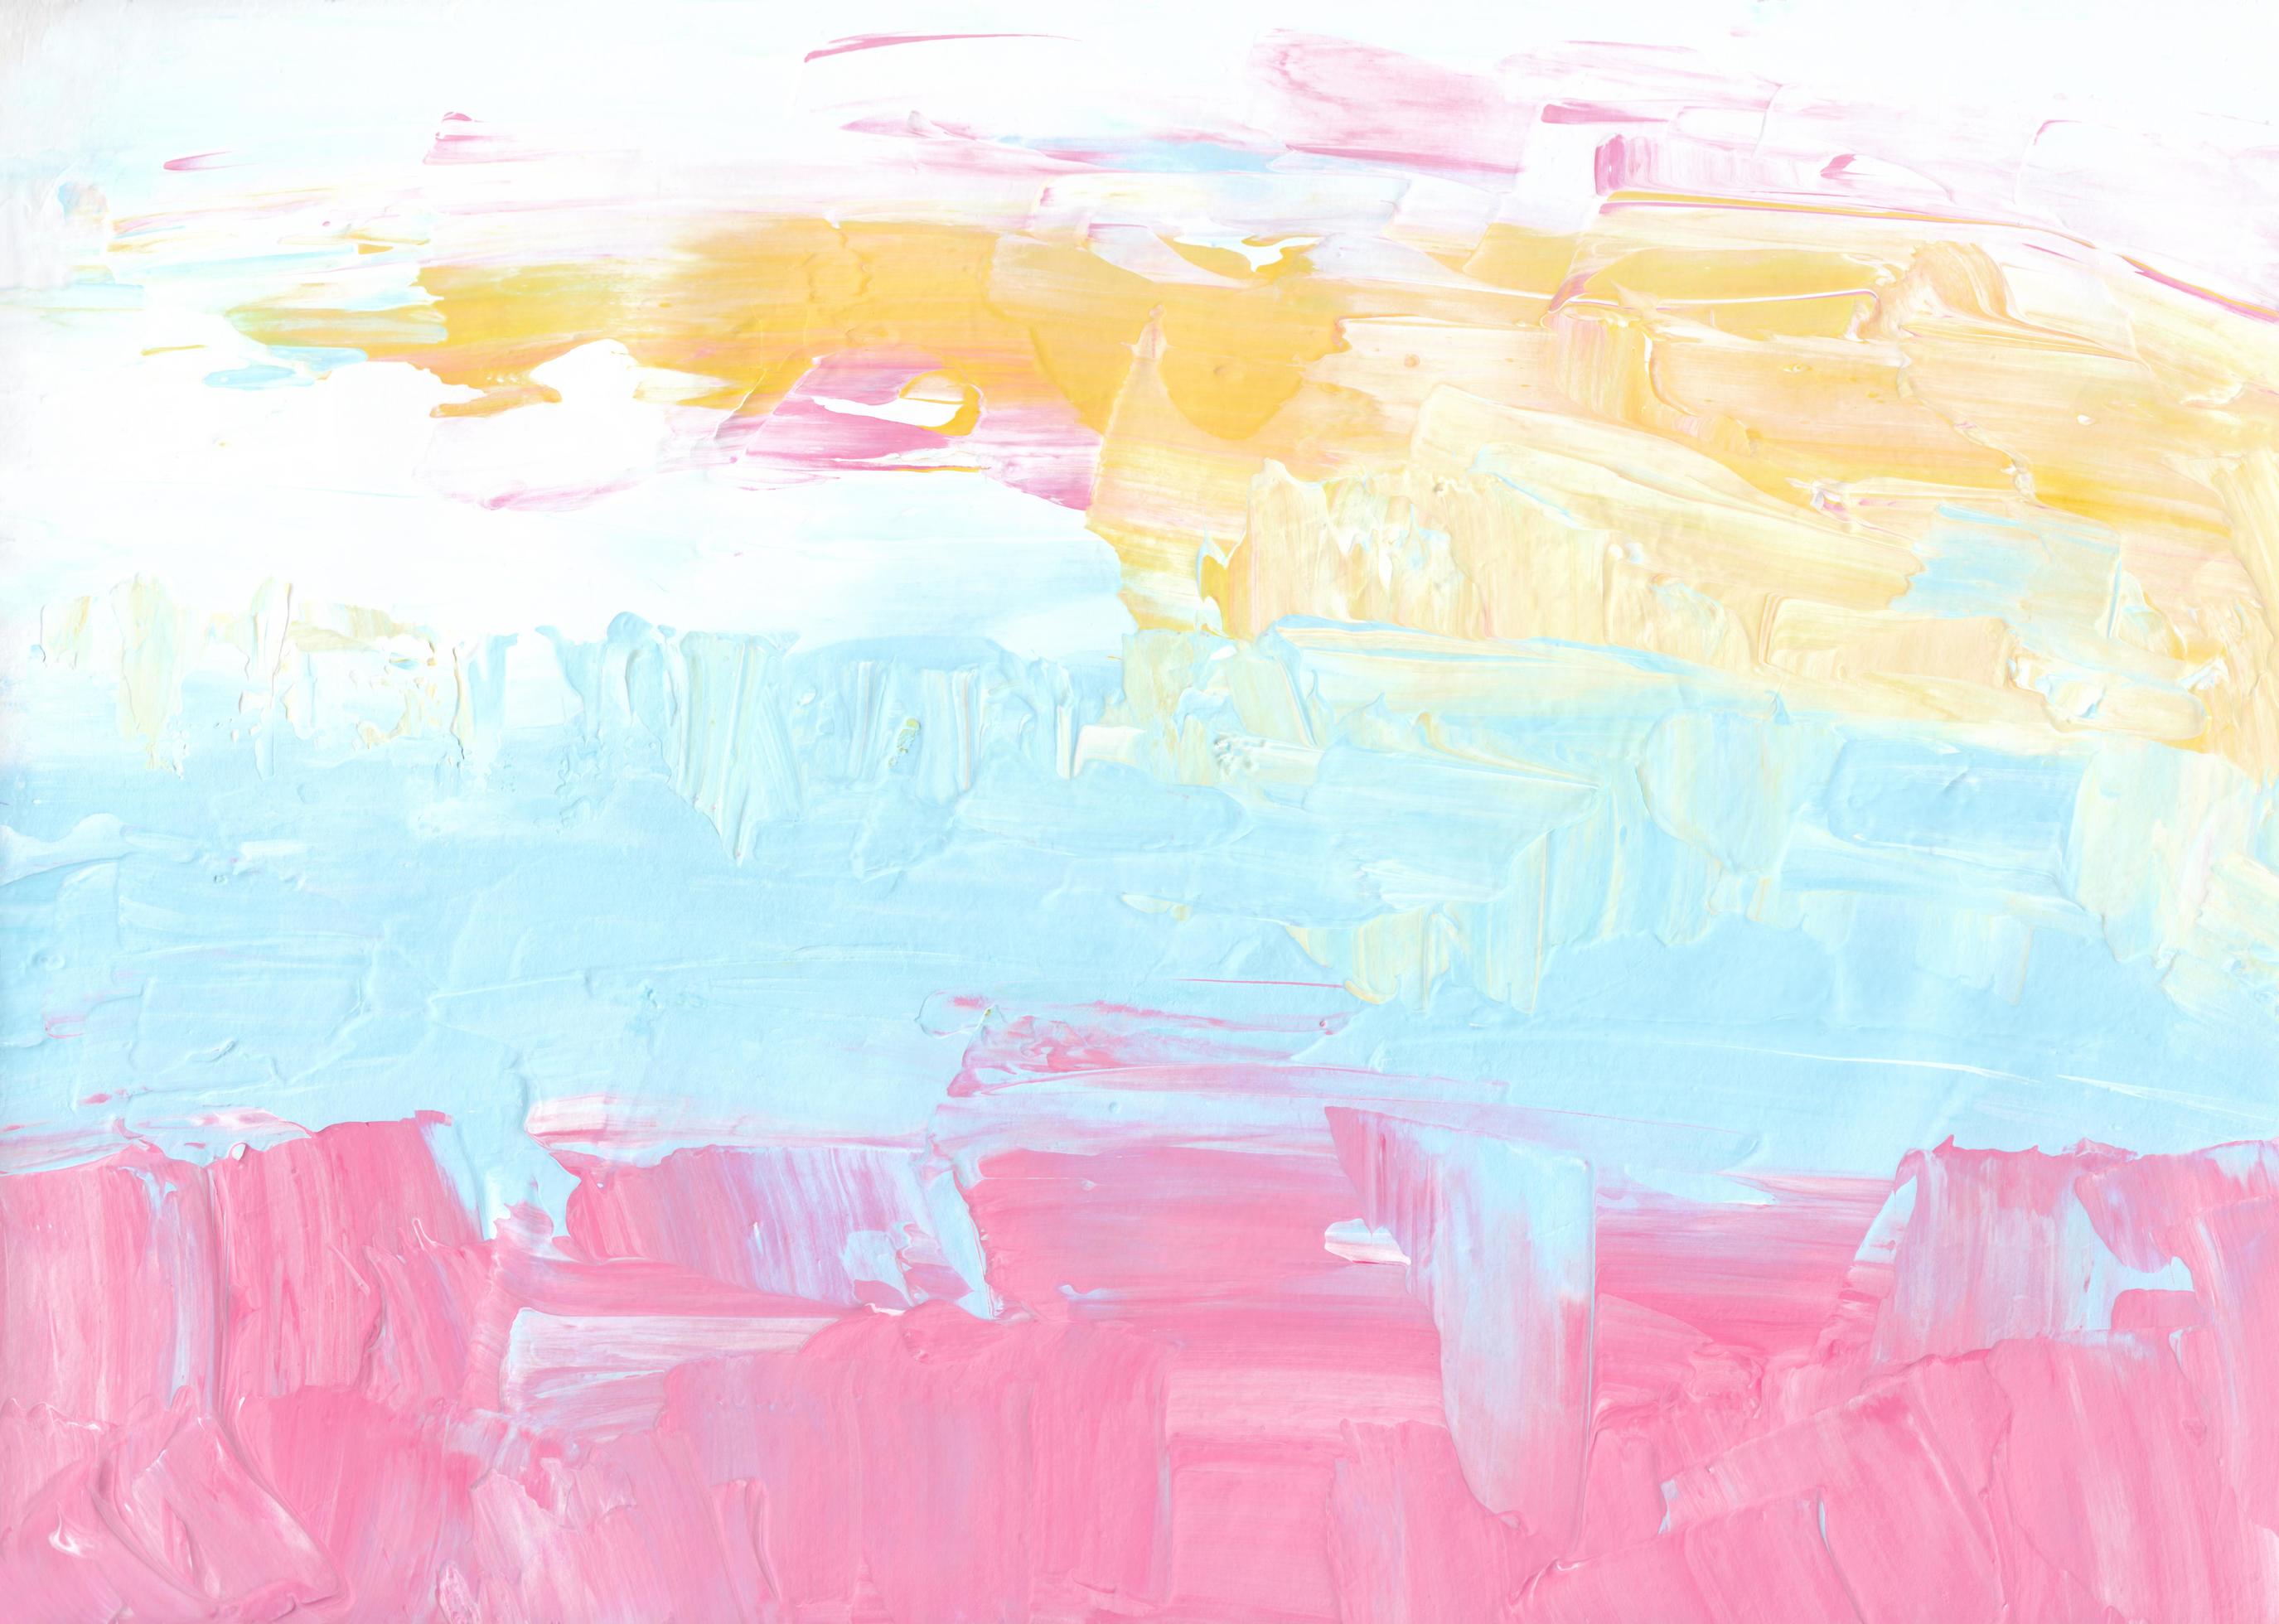 Abstract Fusion Multicolored Flowy Chalk Pastel Drawing On White Paper  Stock Photo - Download Image Now - iStock